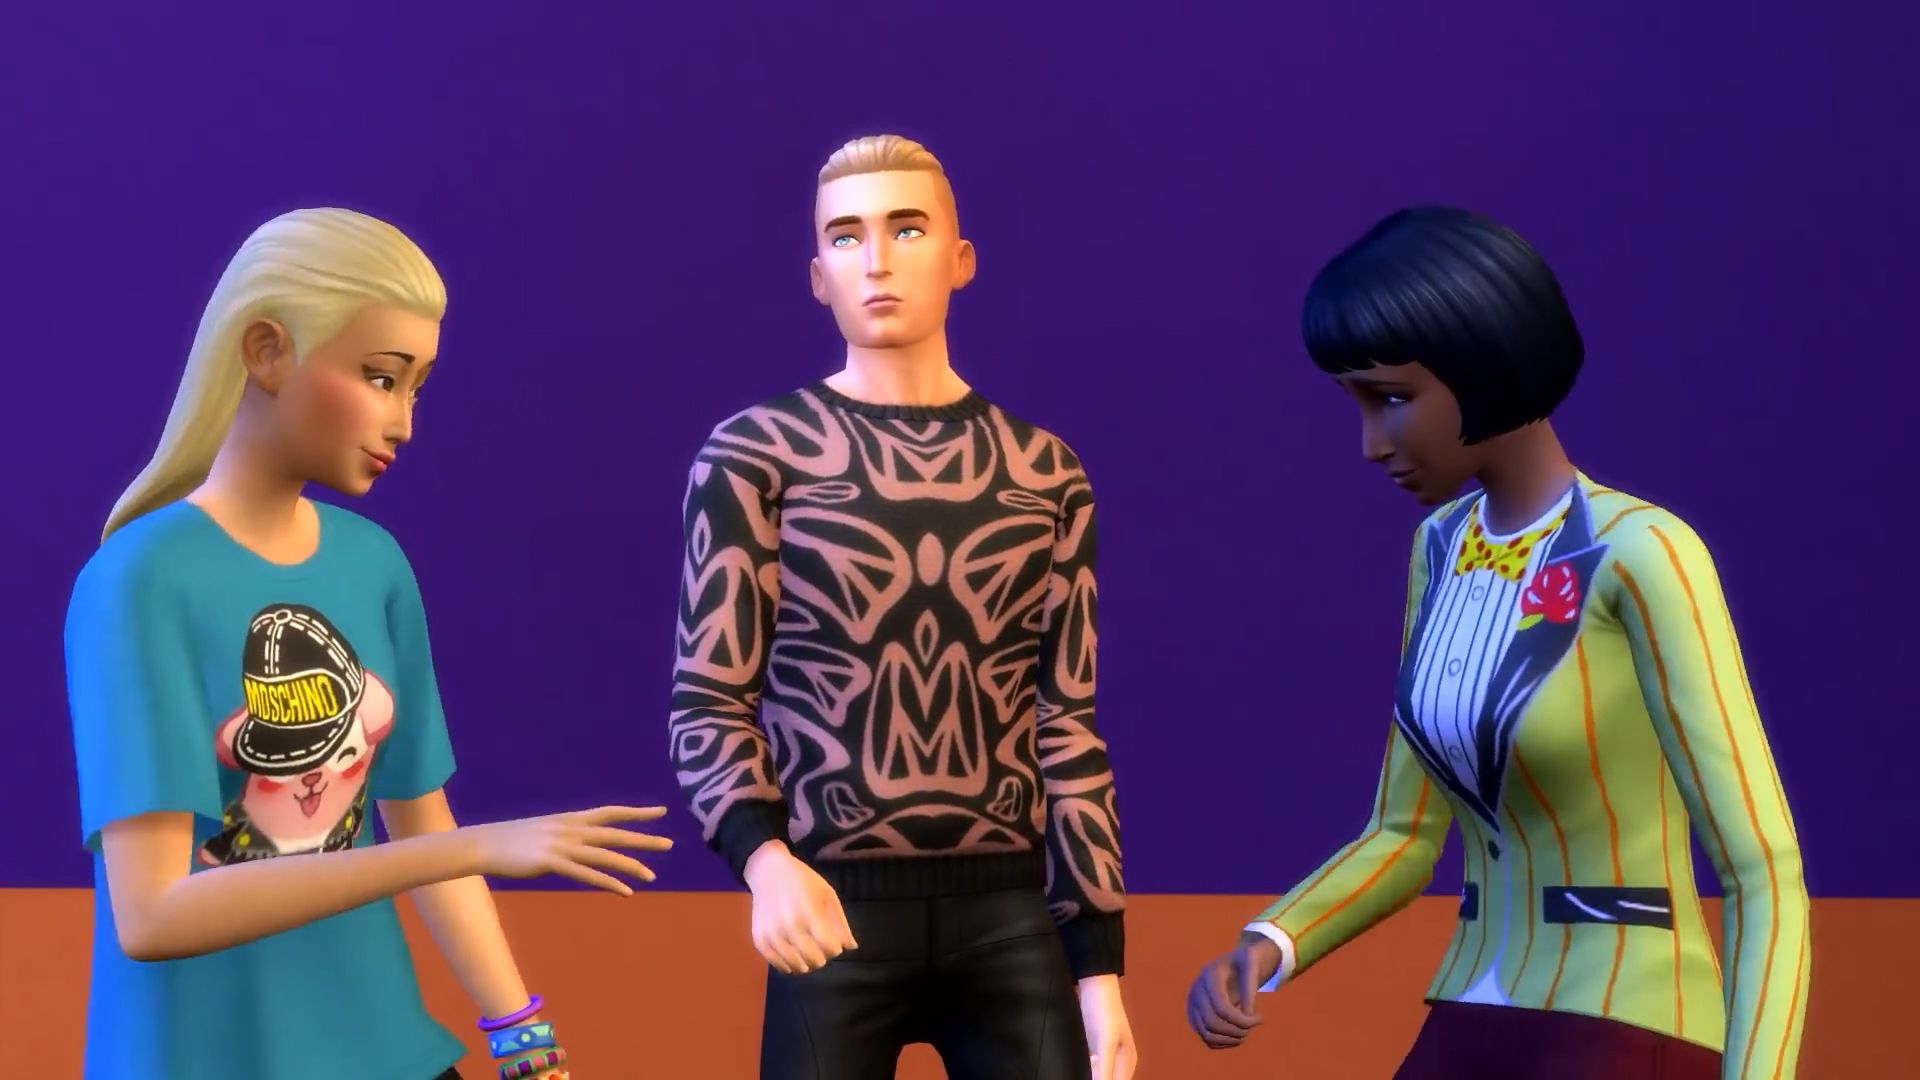 Create A Sim Items in The Sims 4 Moschino Stuff 